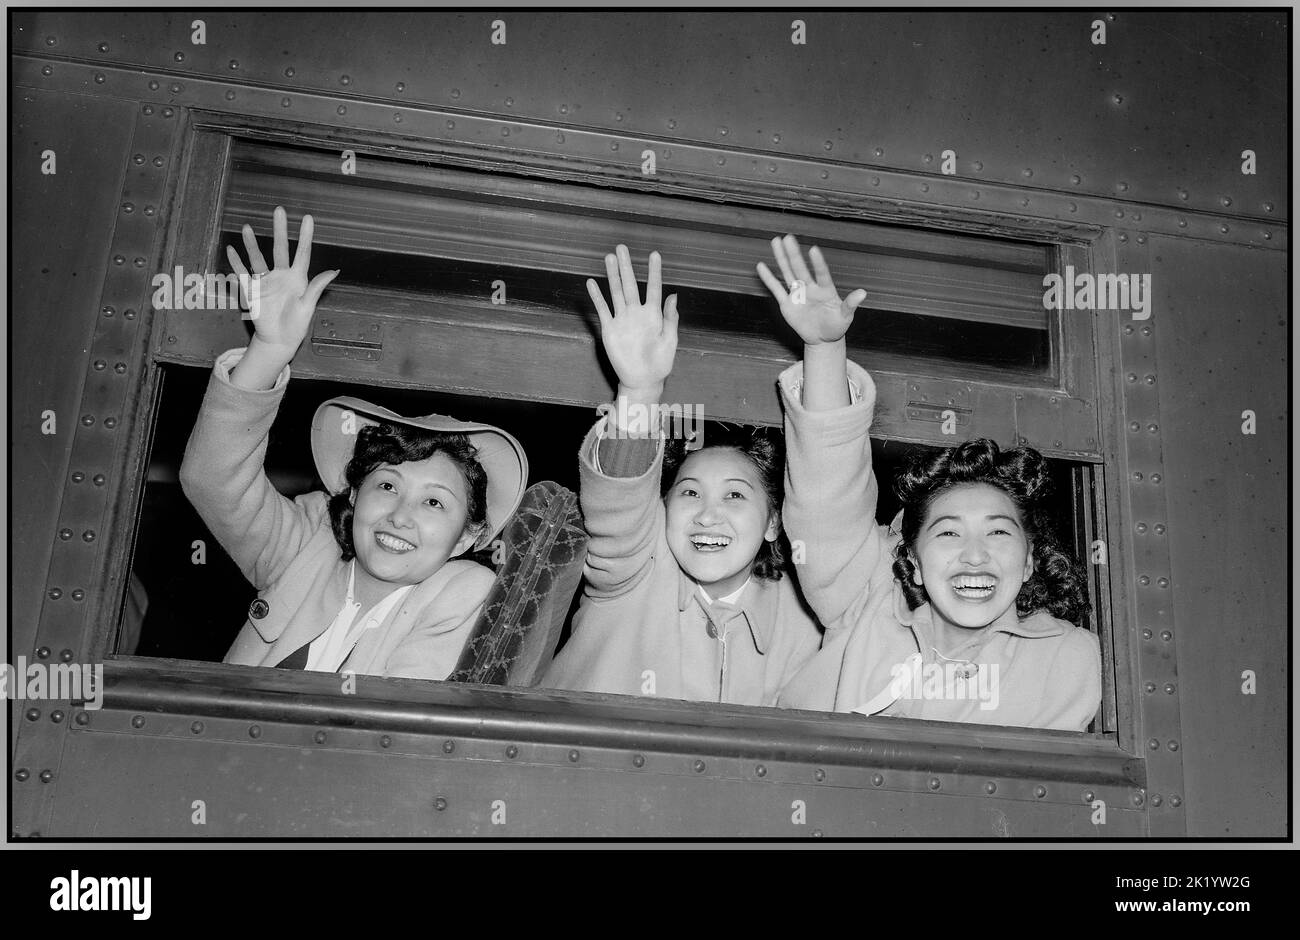 JAPANESE EVACUEES USA WW2 American Propaganda Image of Japanese female citizens being relocated to a processing center. Los Angeles, California. Waving good-bye as the train pulls away from the station. These girls are on their way to an assembly center with others from this area of Japanese ancestry. They will later be transferred to a War Relocation Authority center to spend the duration. Date 1 April 1942 World War II Second World War Pacific War Stock Photo